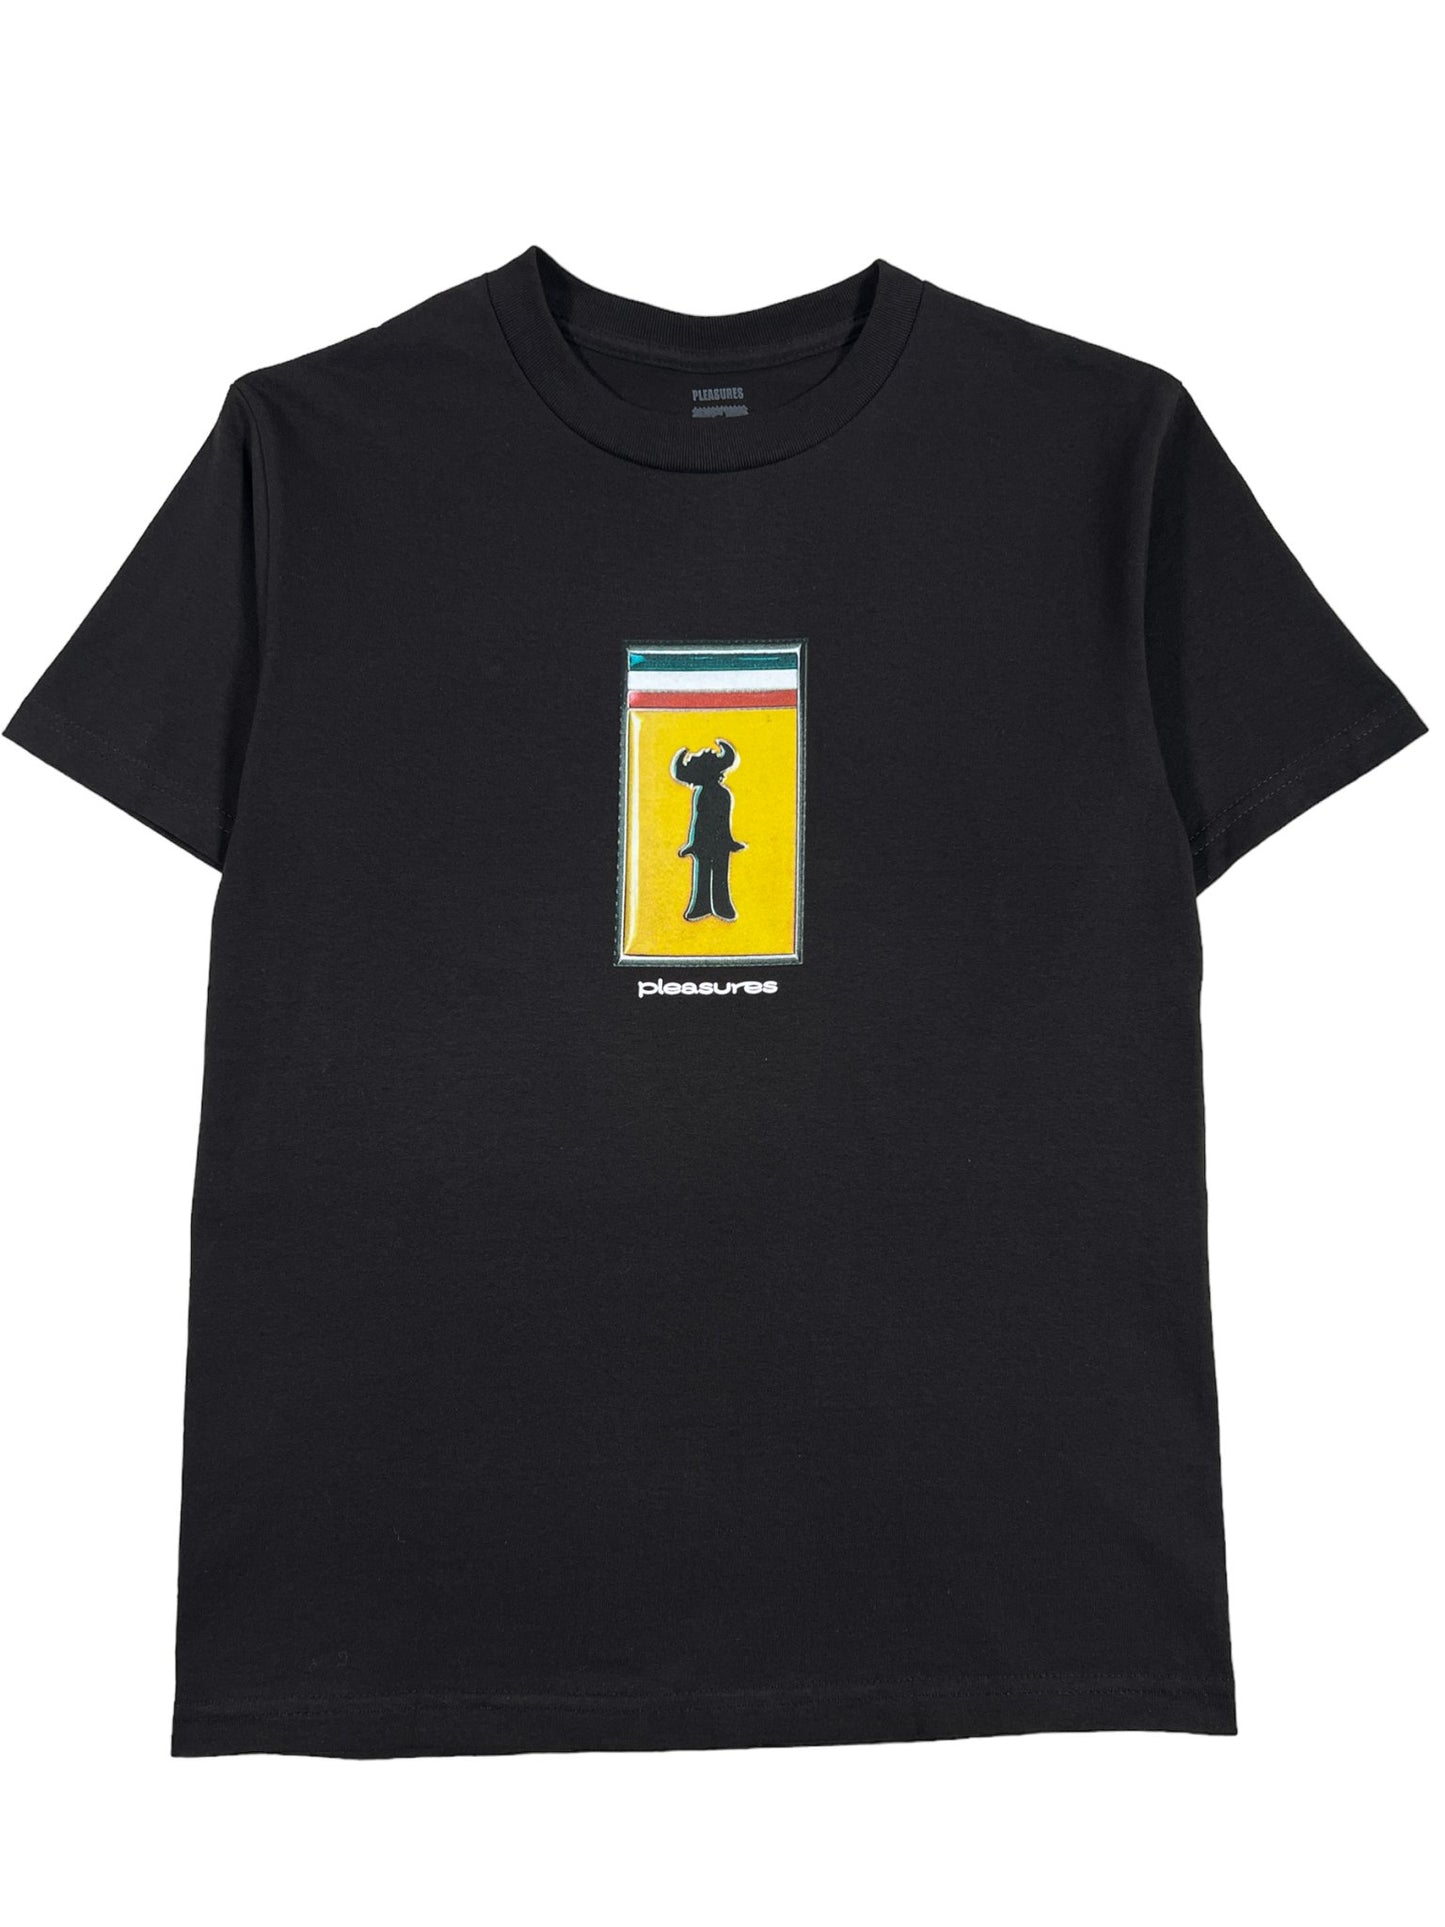 A PLEASURES black t-shirt with an image of a man in a yellow shirt, representing the pleasures of travelling.